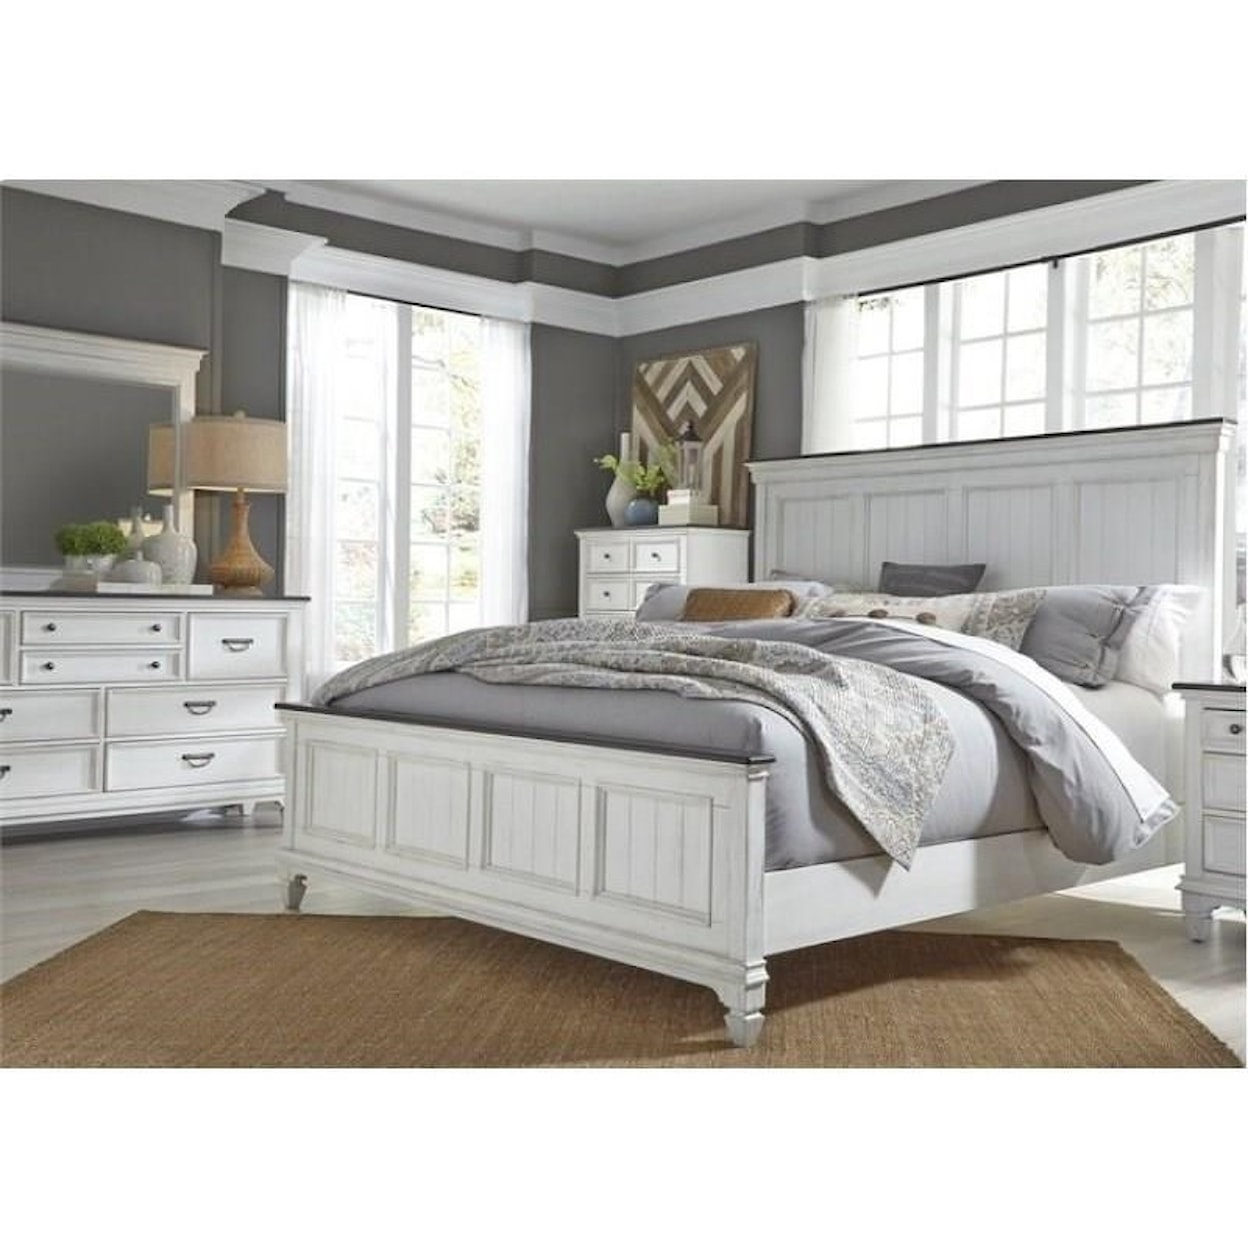 Liberty Furniture Allyson Park King Bedroom Group